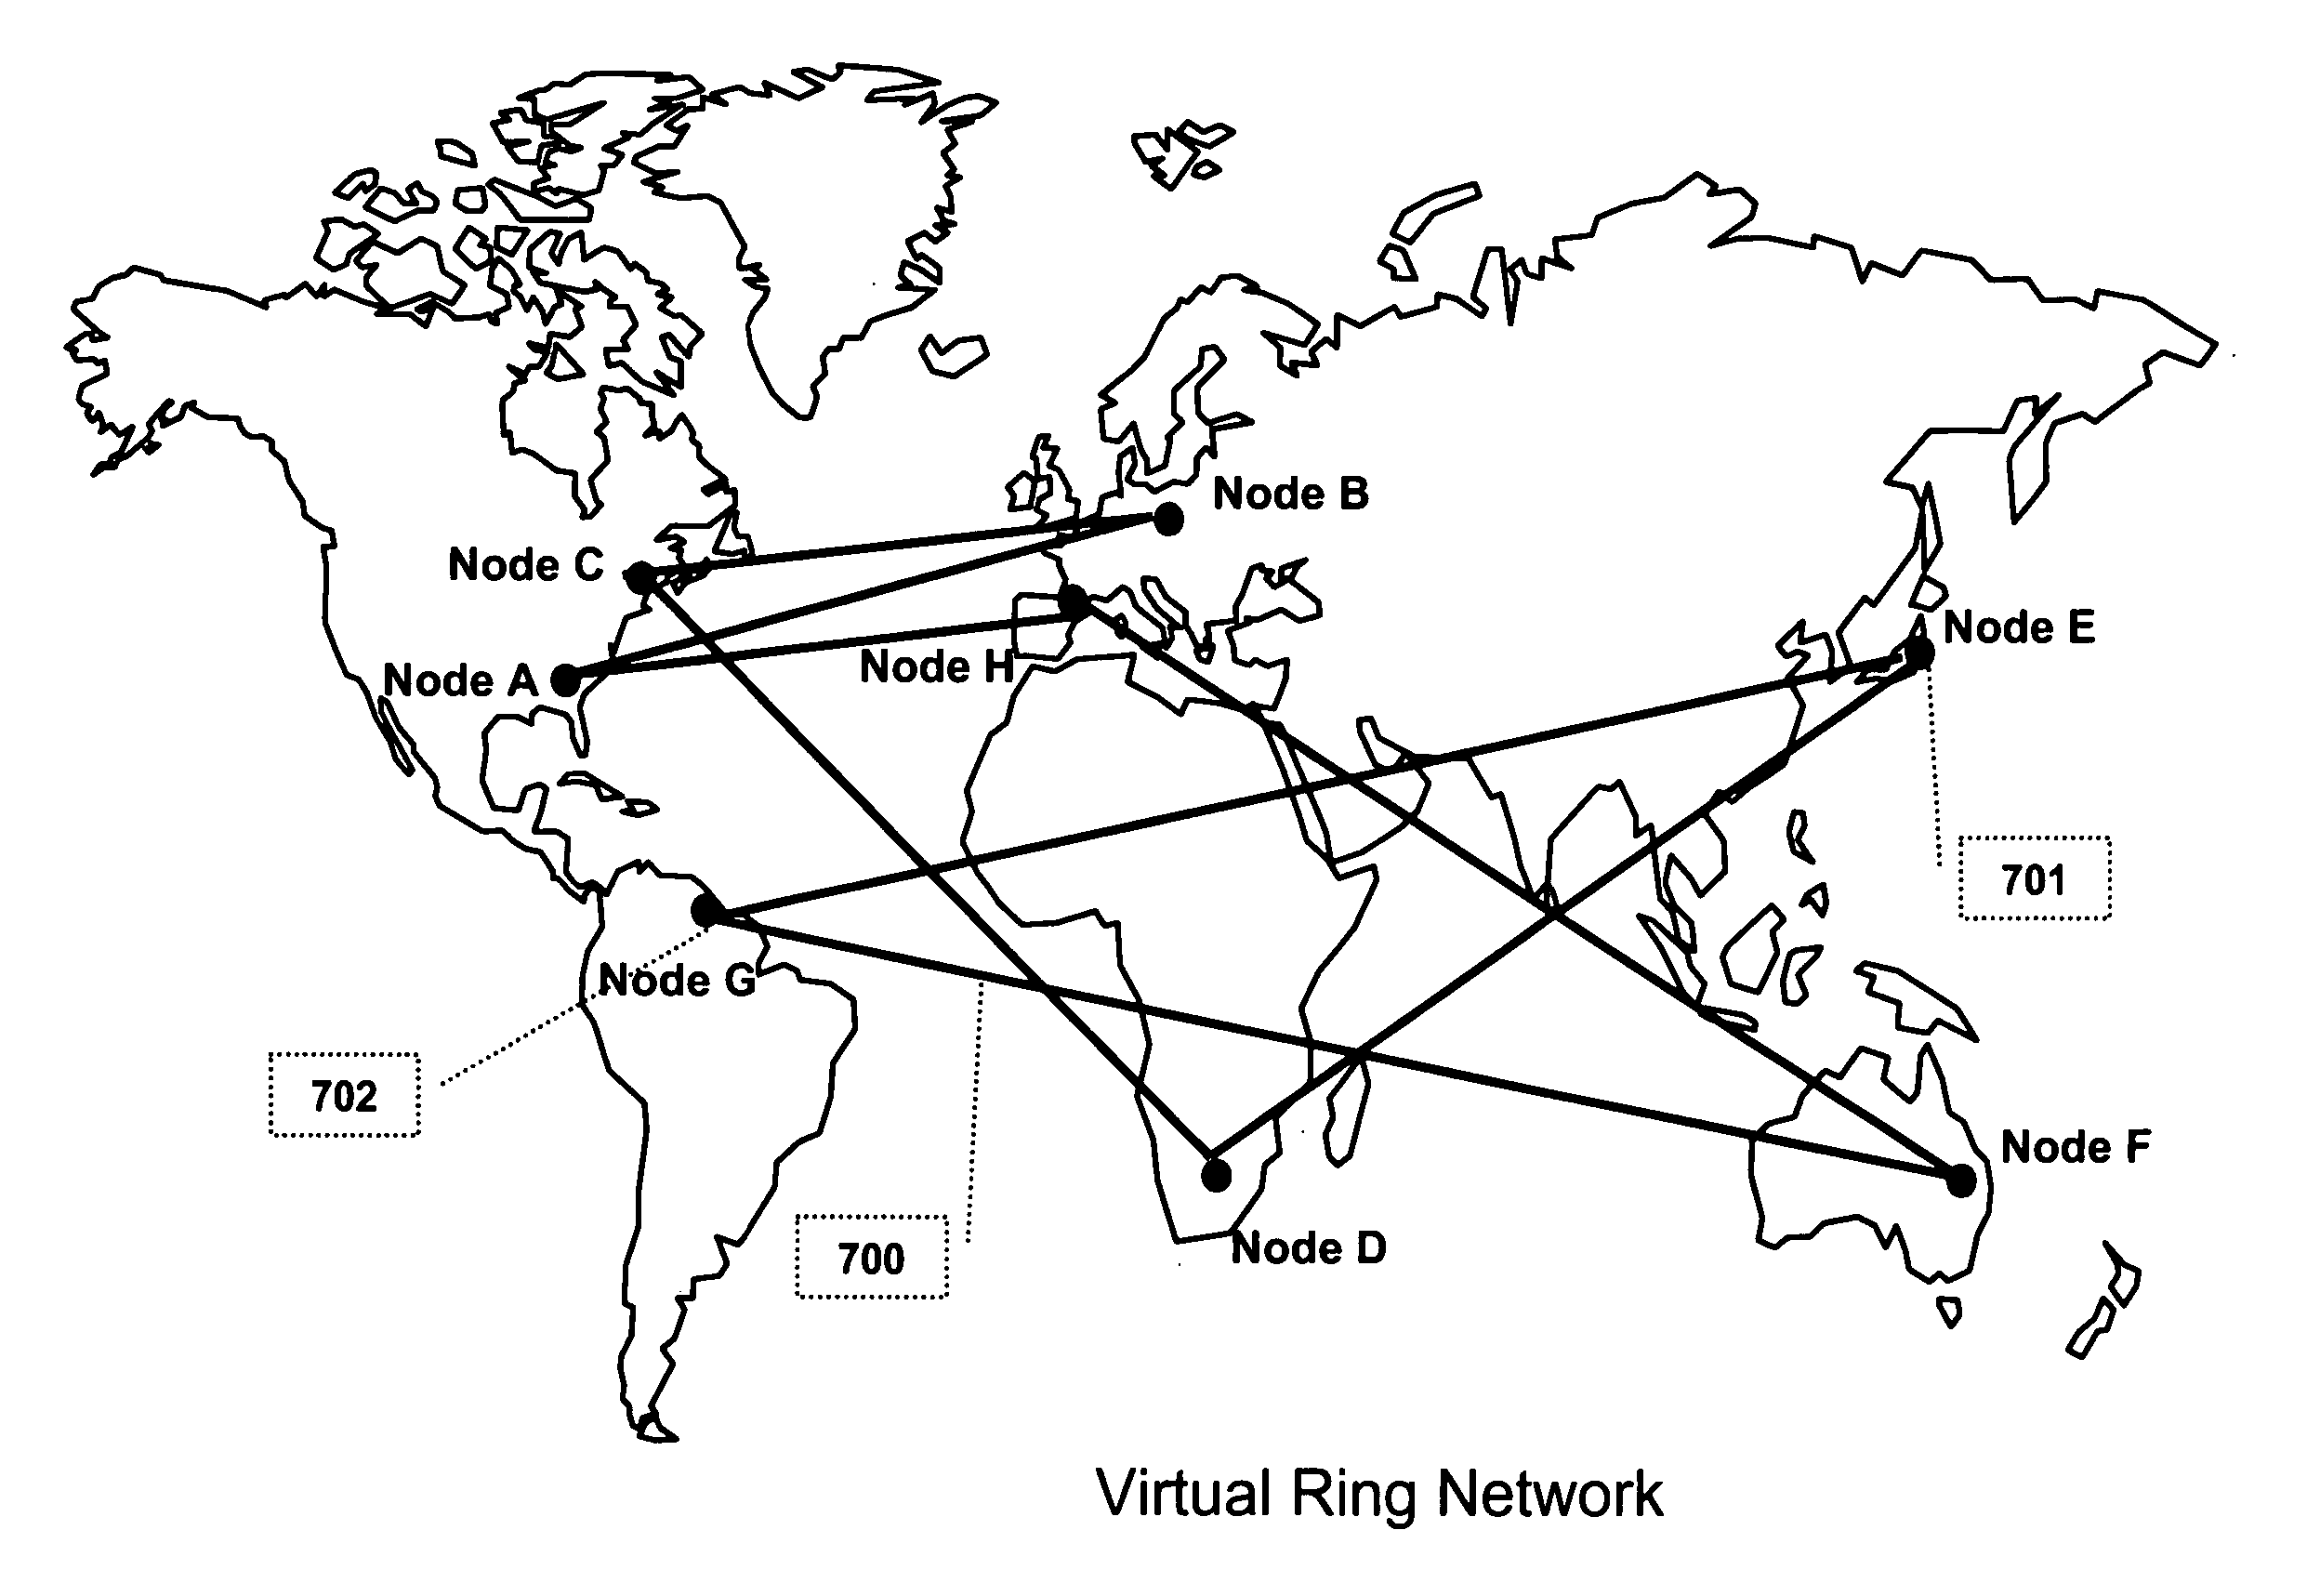 System and method for optimizing the topology of a virtual ring based upon a TCP/IP network